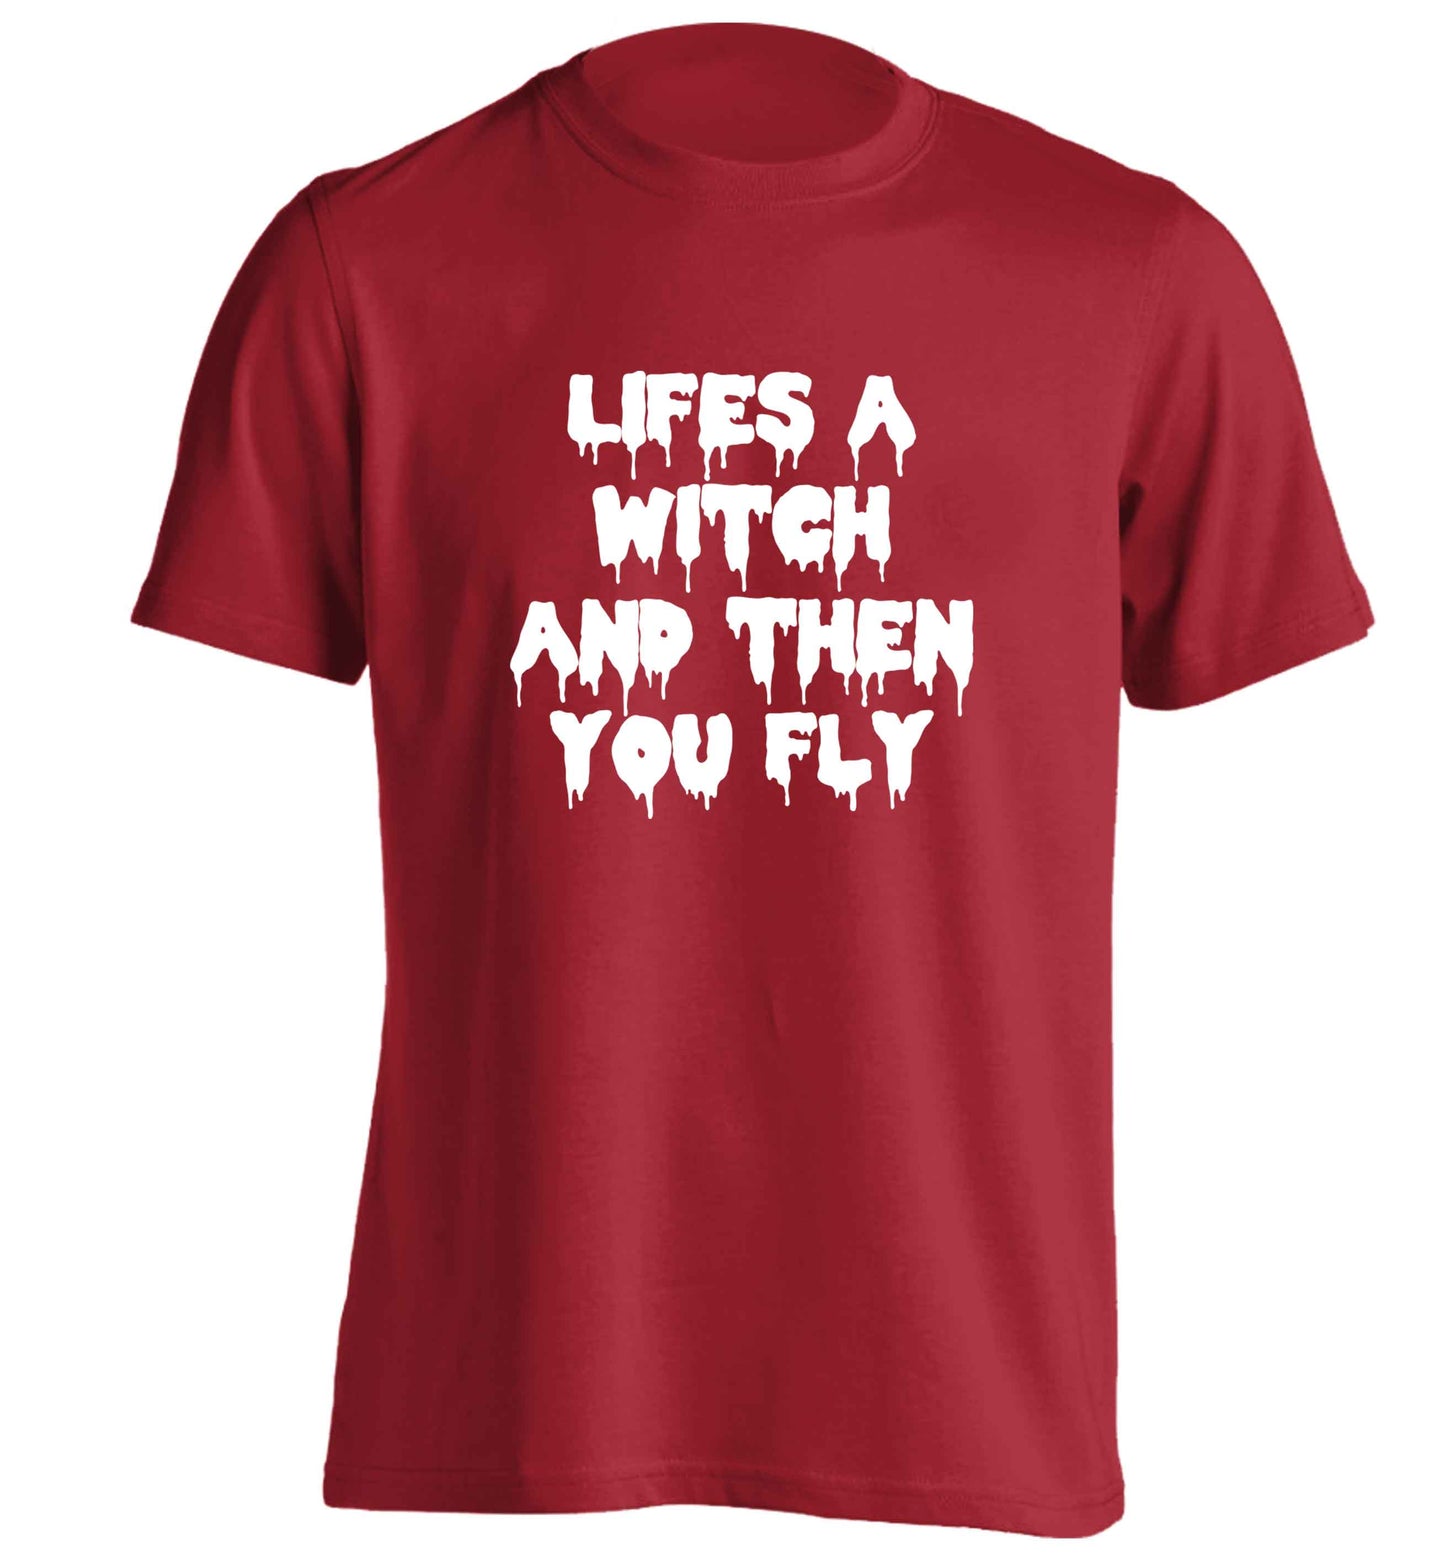 Life's a witch and then you fly adults unisex red Tshirt 2XL